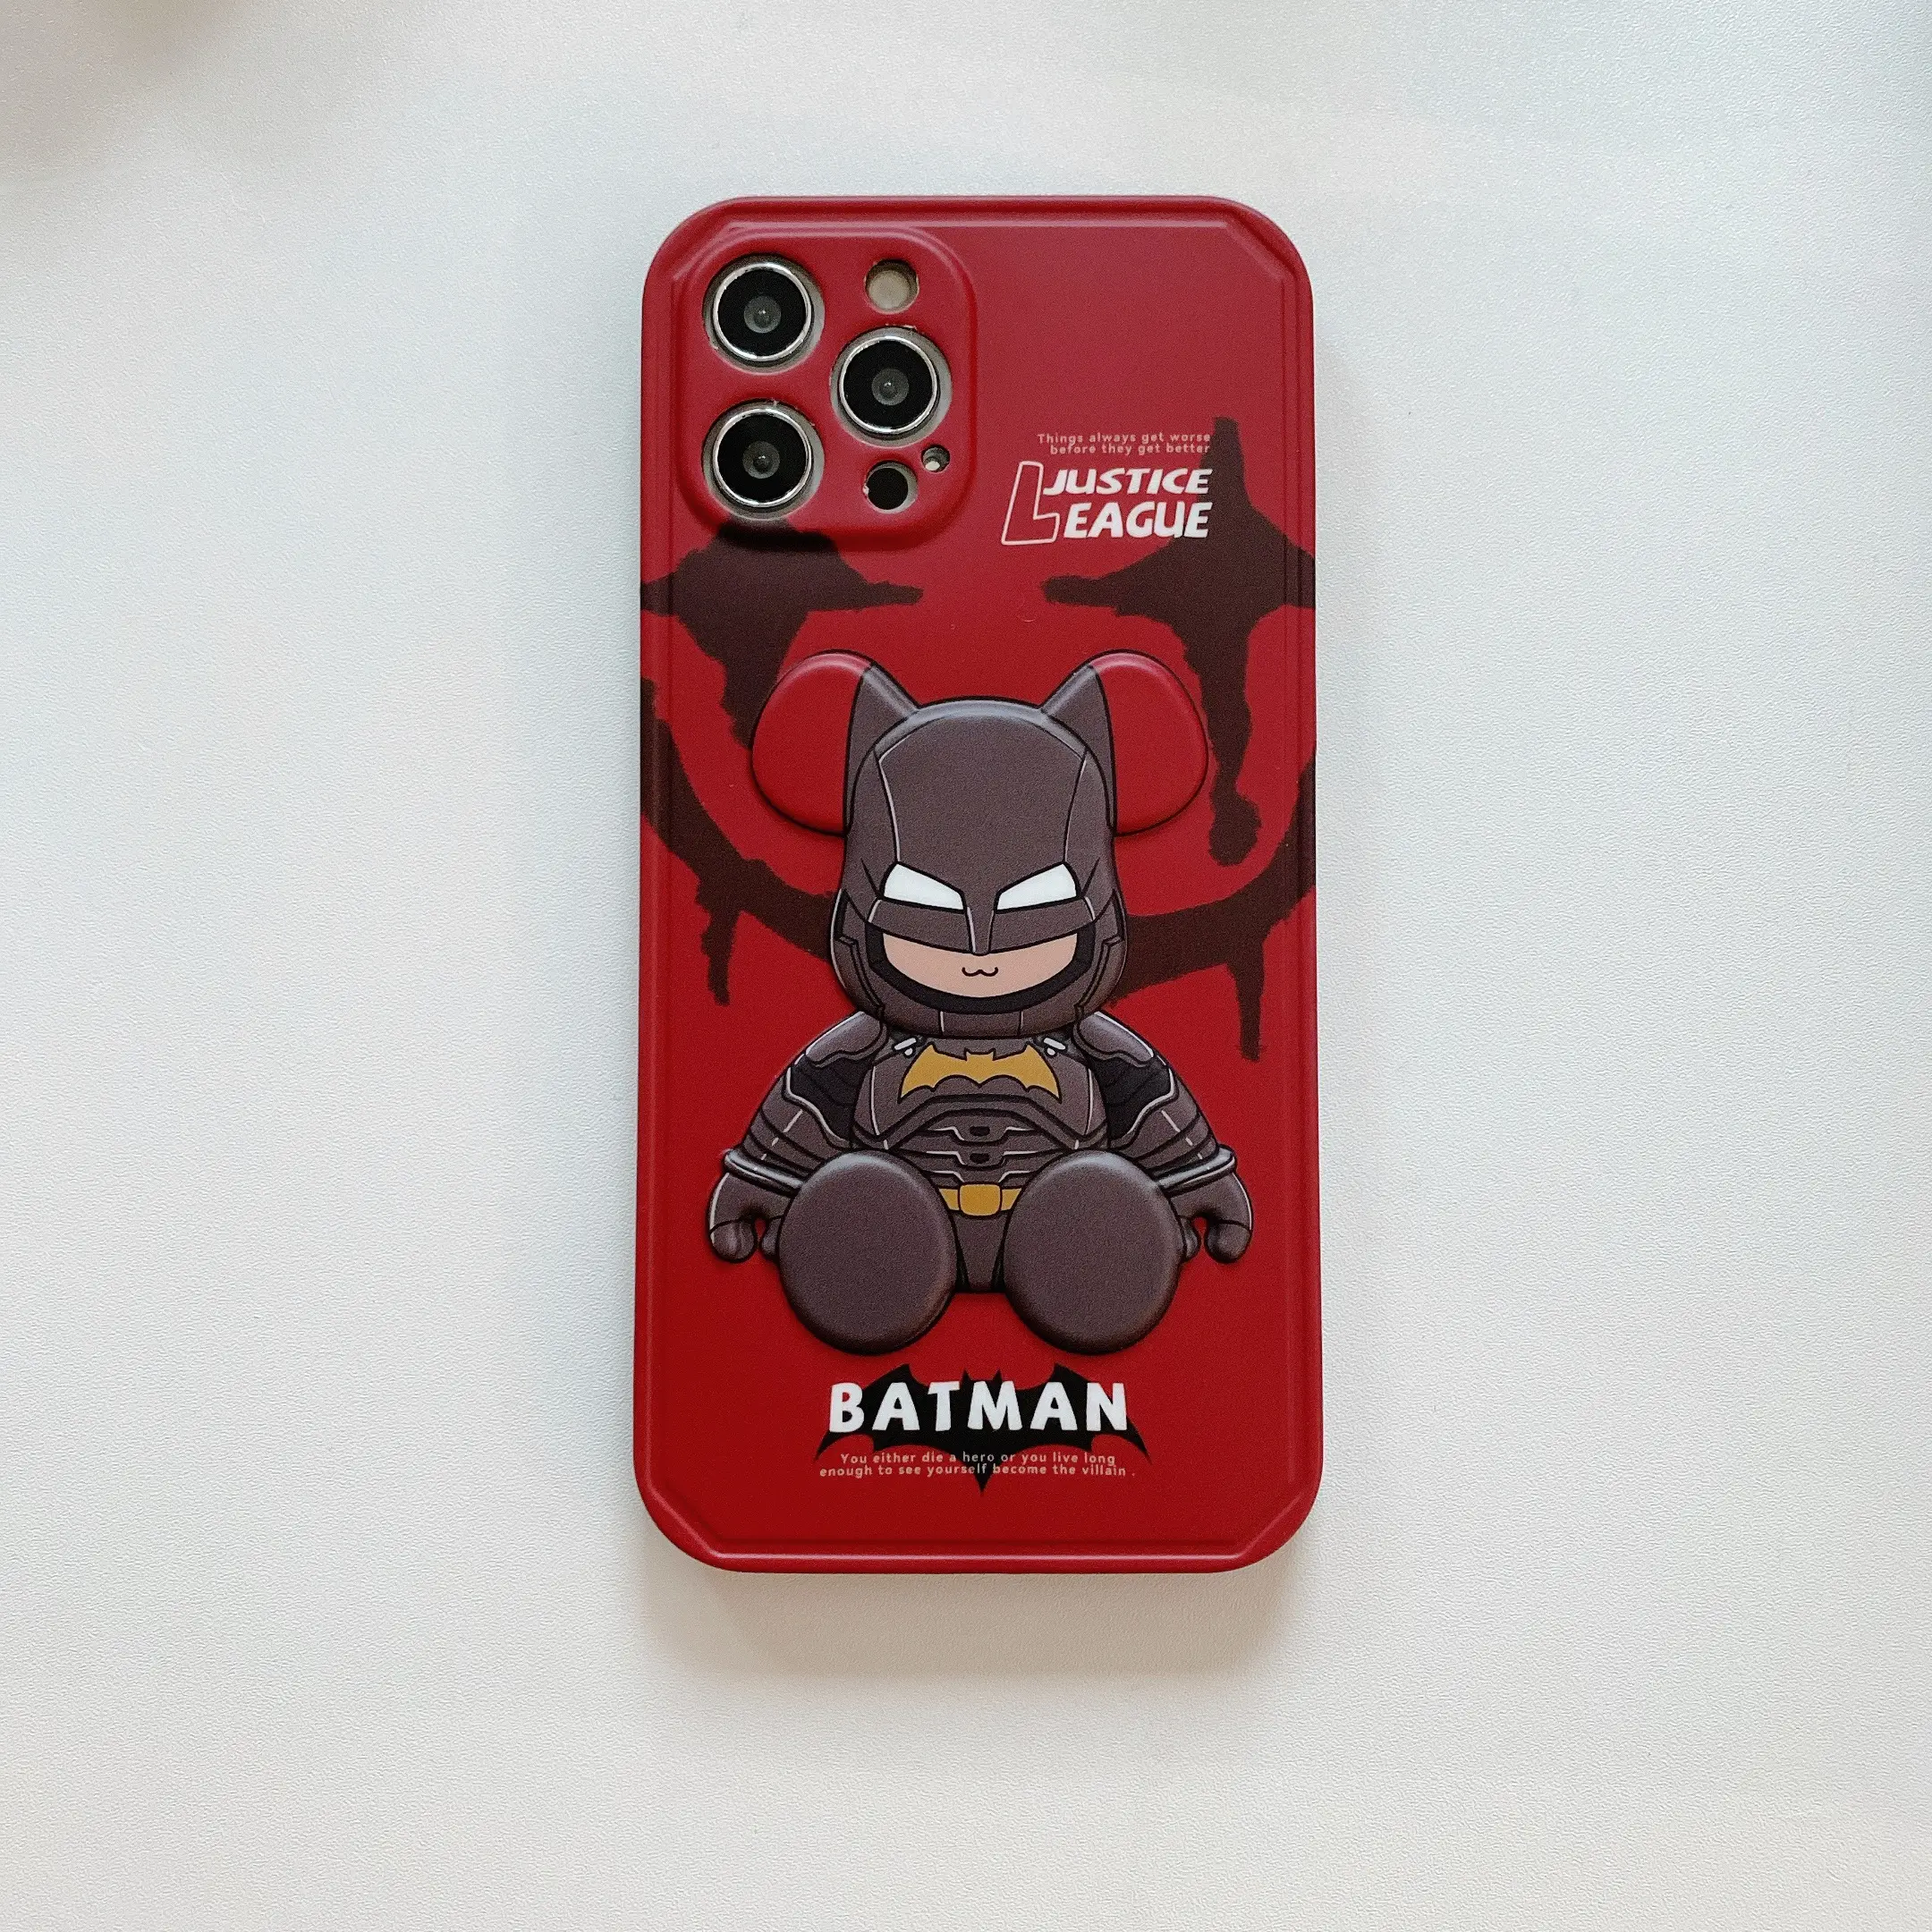 2022 Red Electroplated 3D TPU Venom Bat-man Blue Light Phone Case For iPhone 14 Pro Max 13 Soft TPU Mobile Cover For iPhone Case